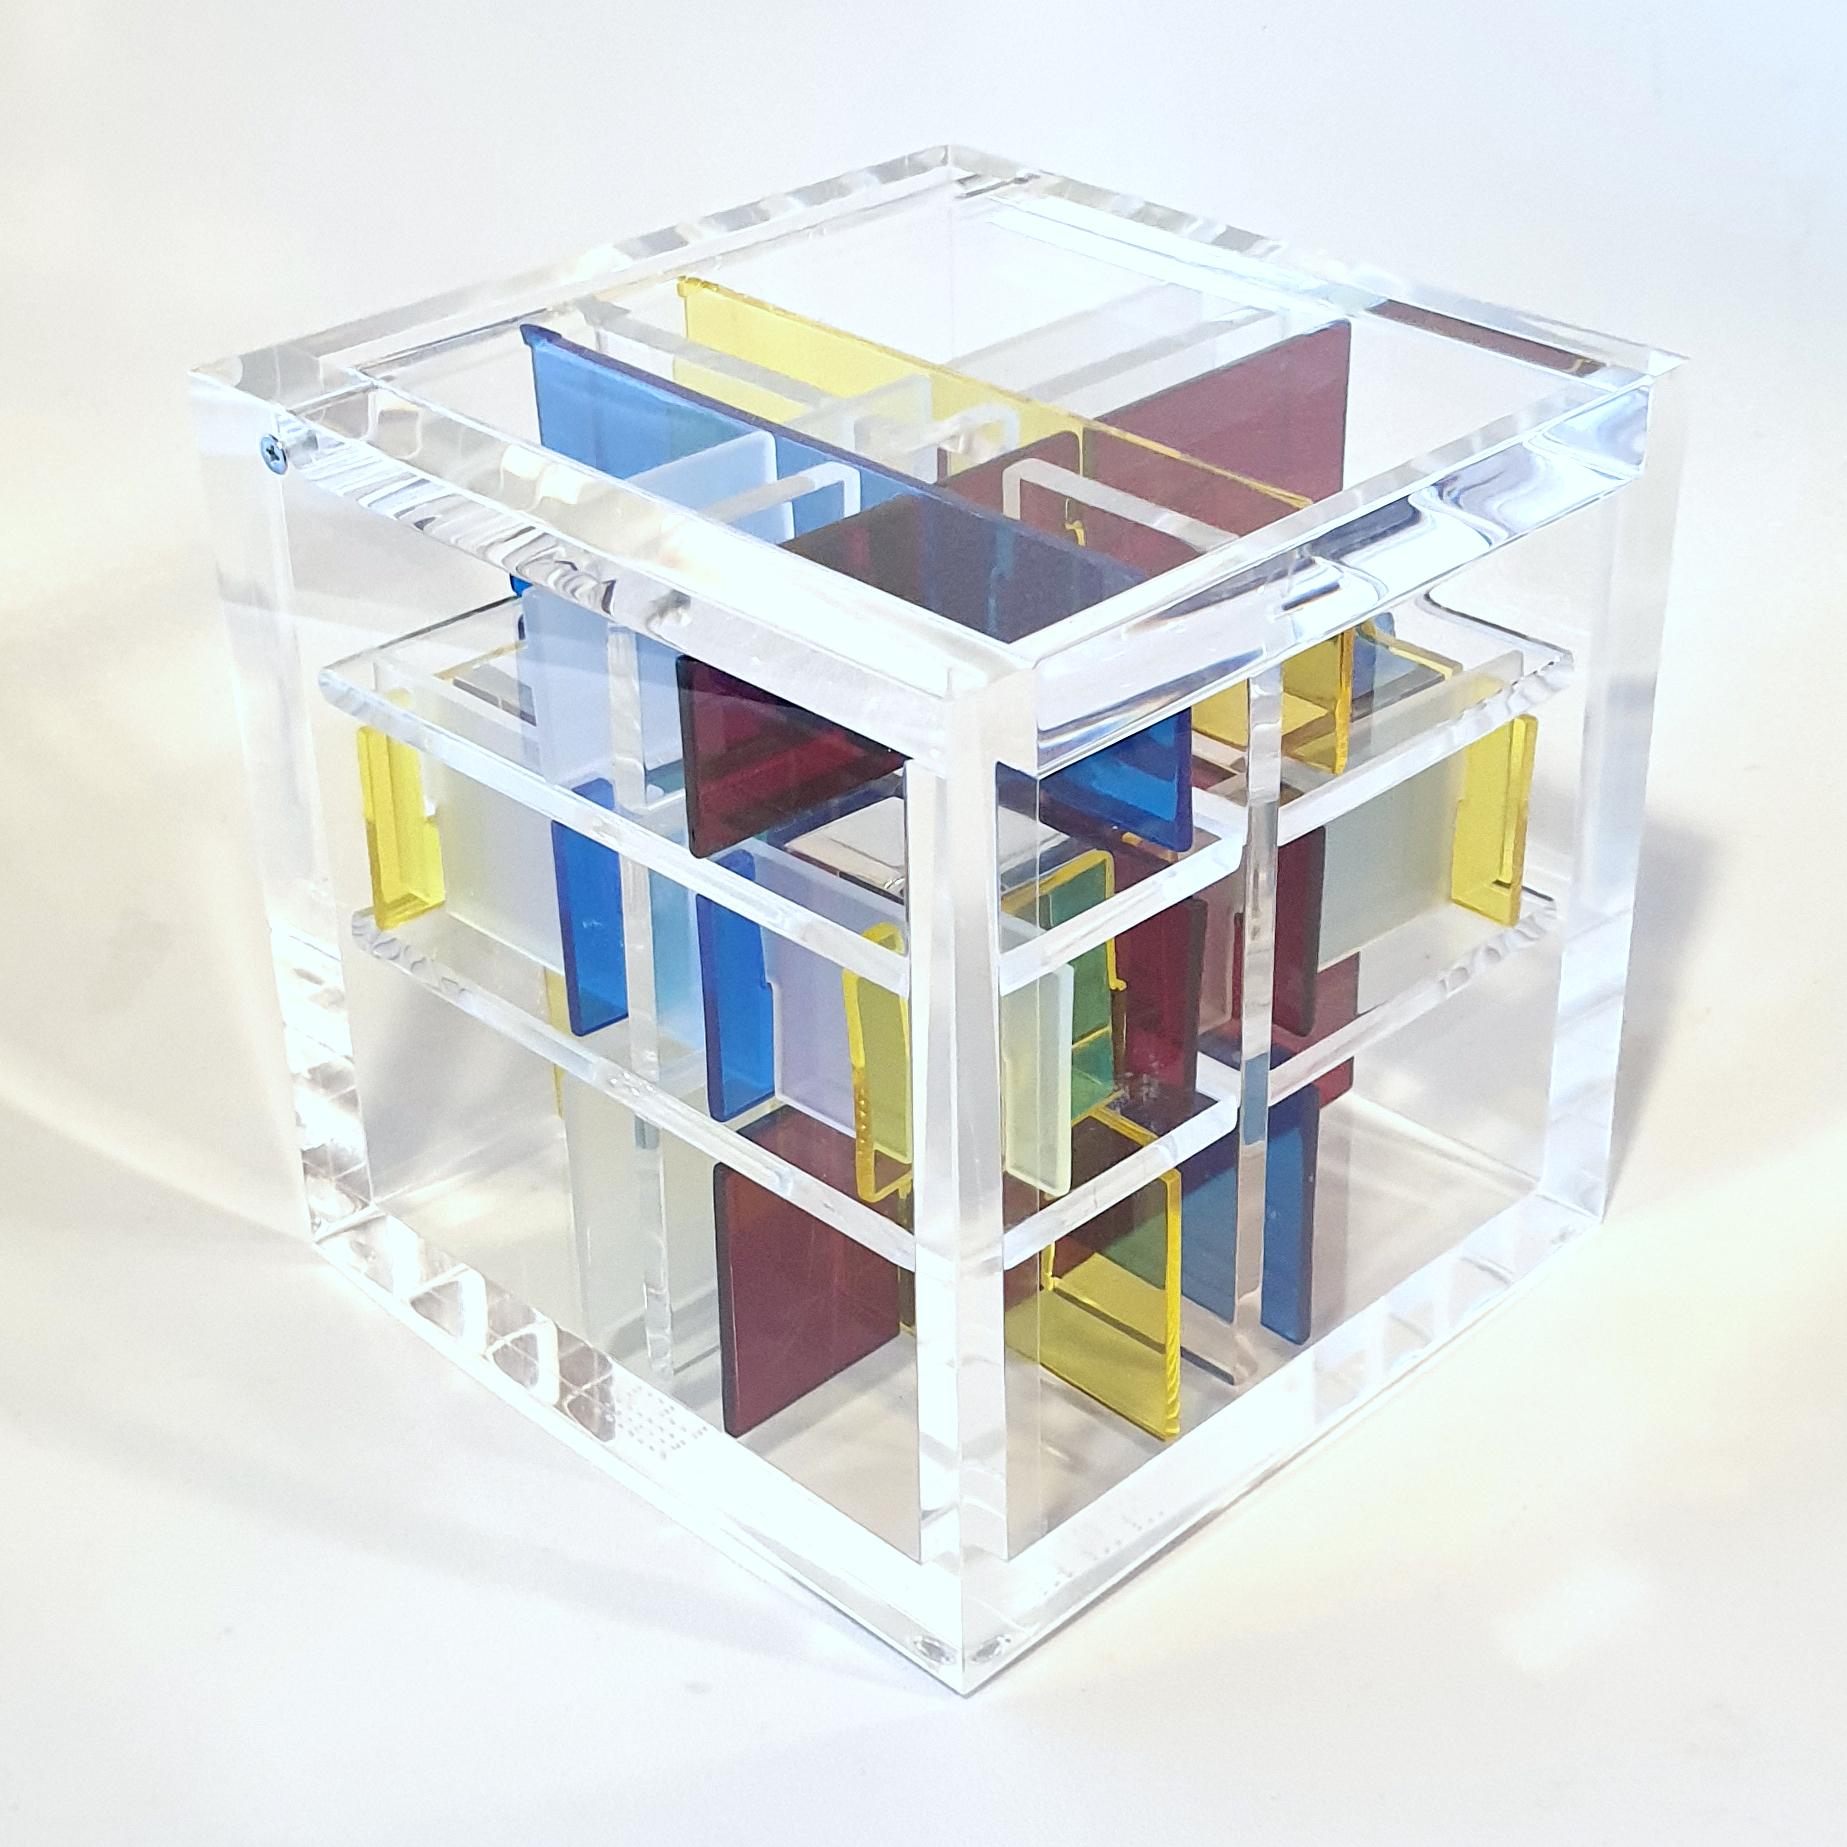 Haringa + Olijve Abstract Sculpture - Spatial Construct - contemporary modern abstract geometric cube sculpture